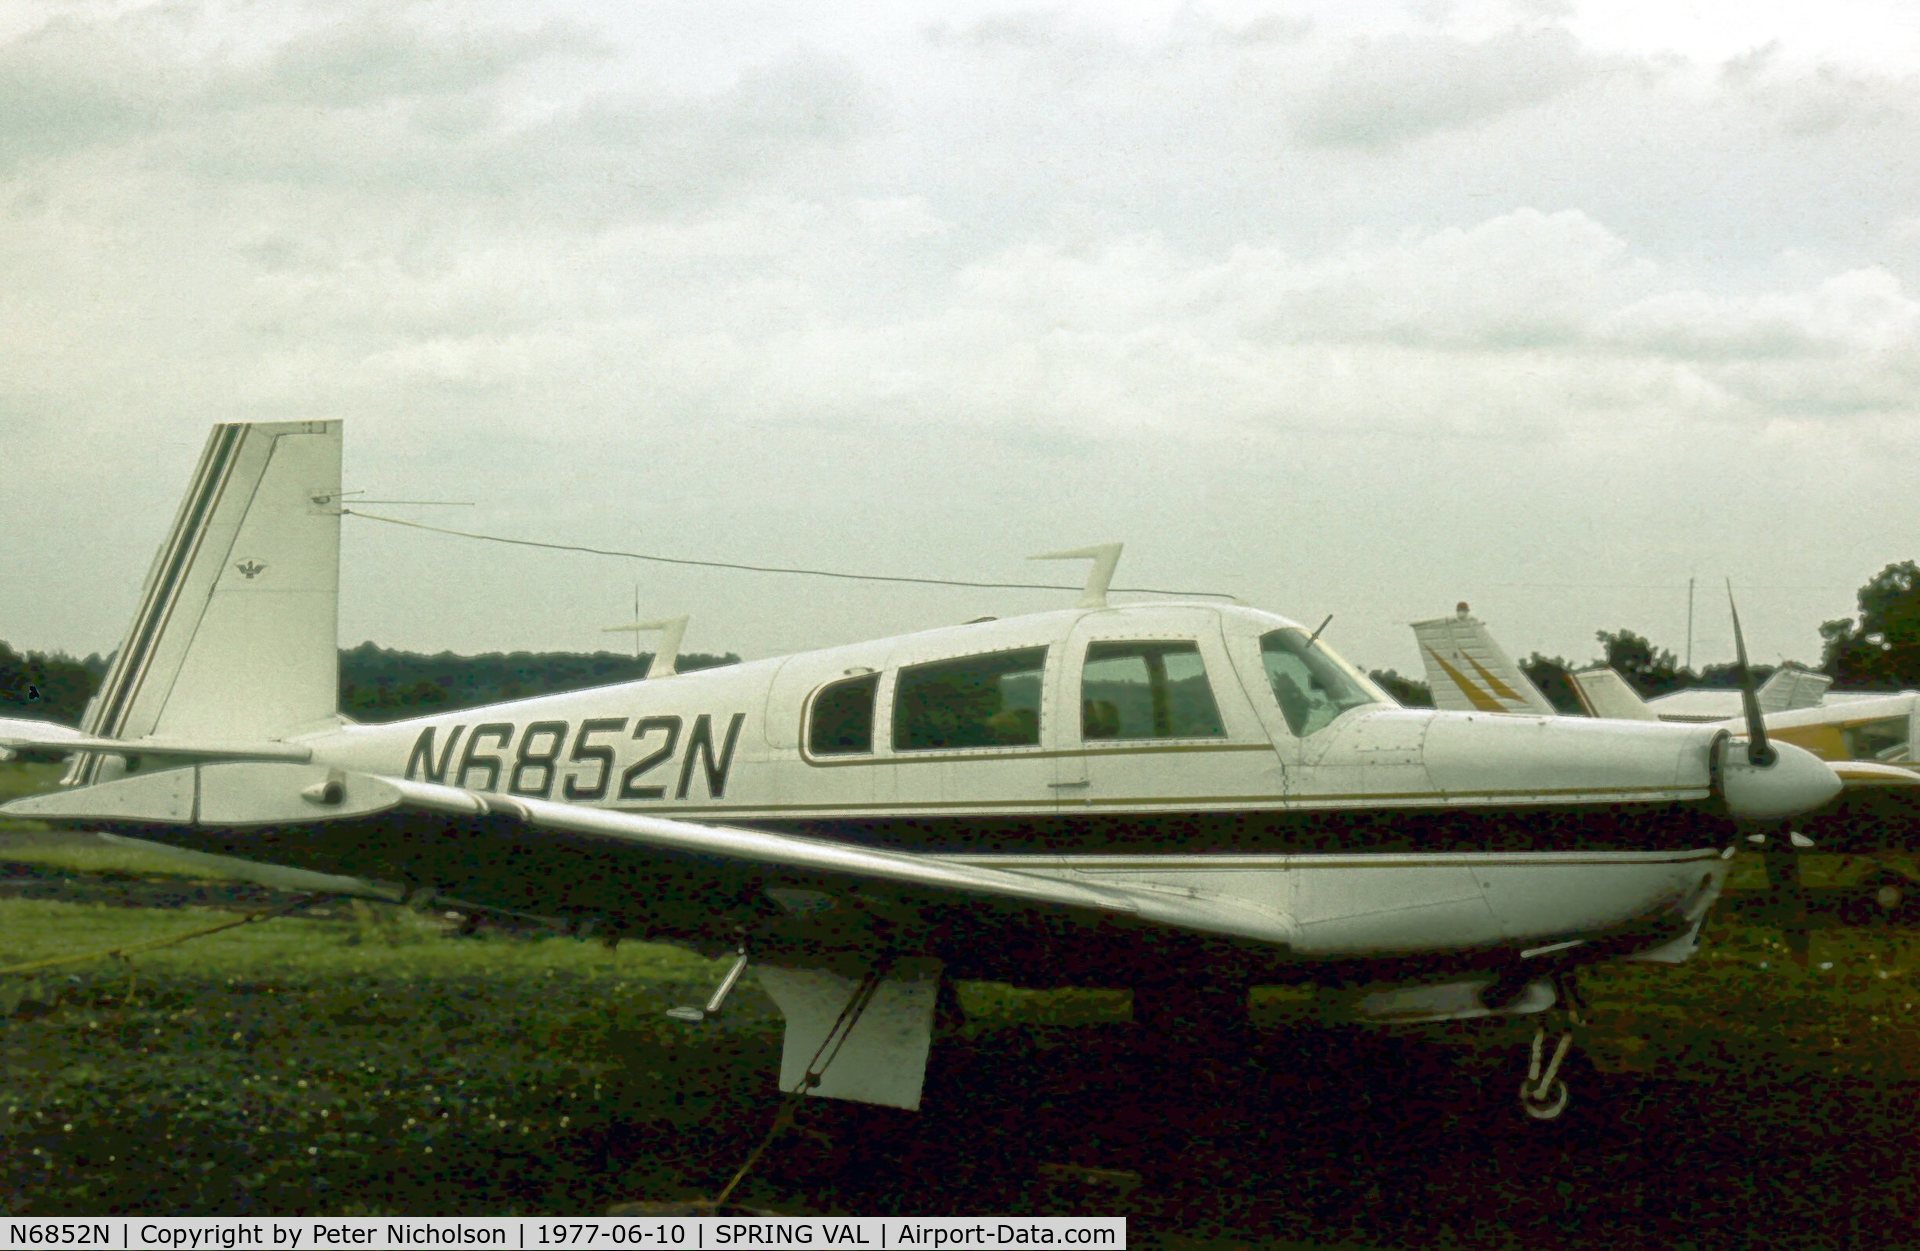 N6852N, 1968 Mooney M20C Ranger C/N 680136, This Mooney was seen at Spring Valley Airport, New York State in the Summer of 1977 - the airport closed in 1985.